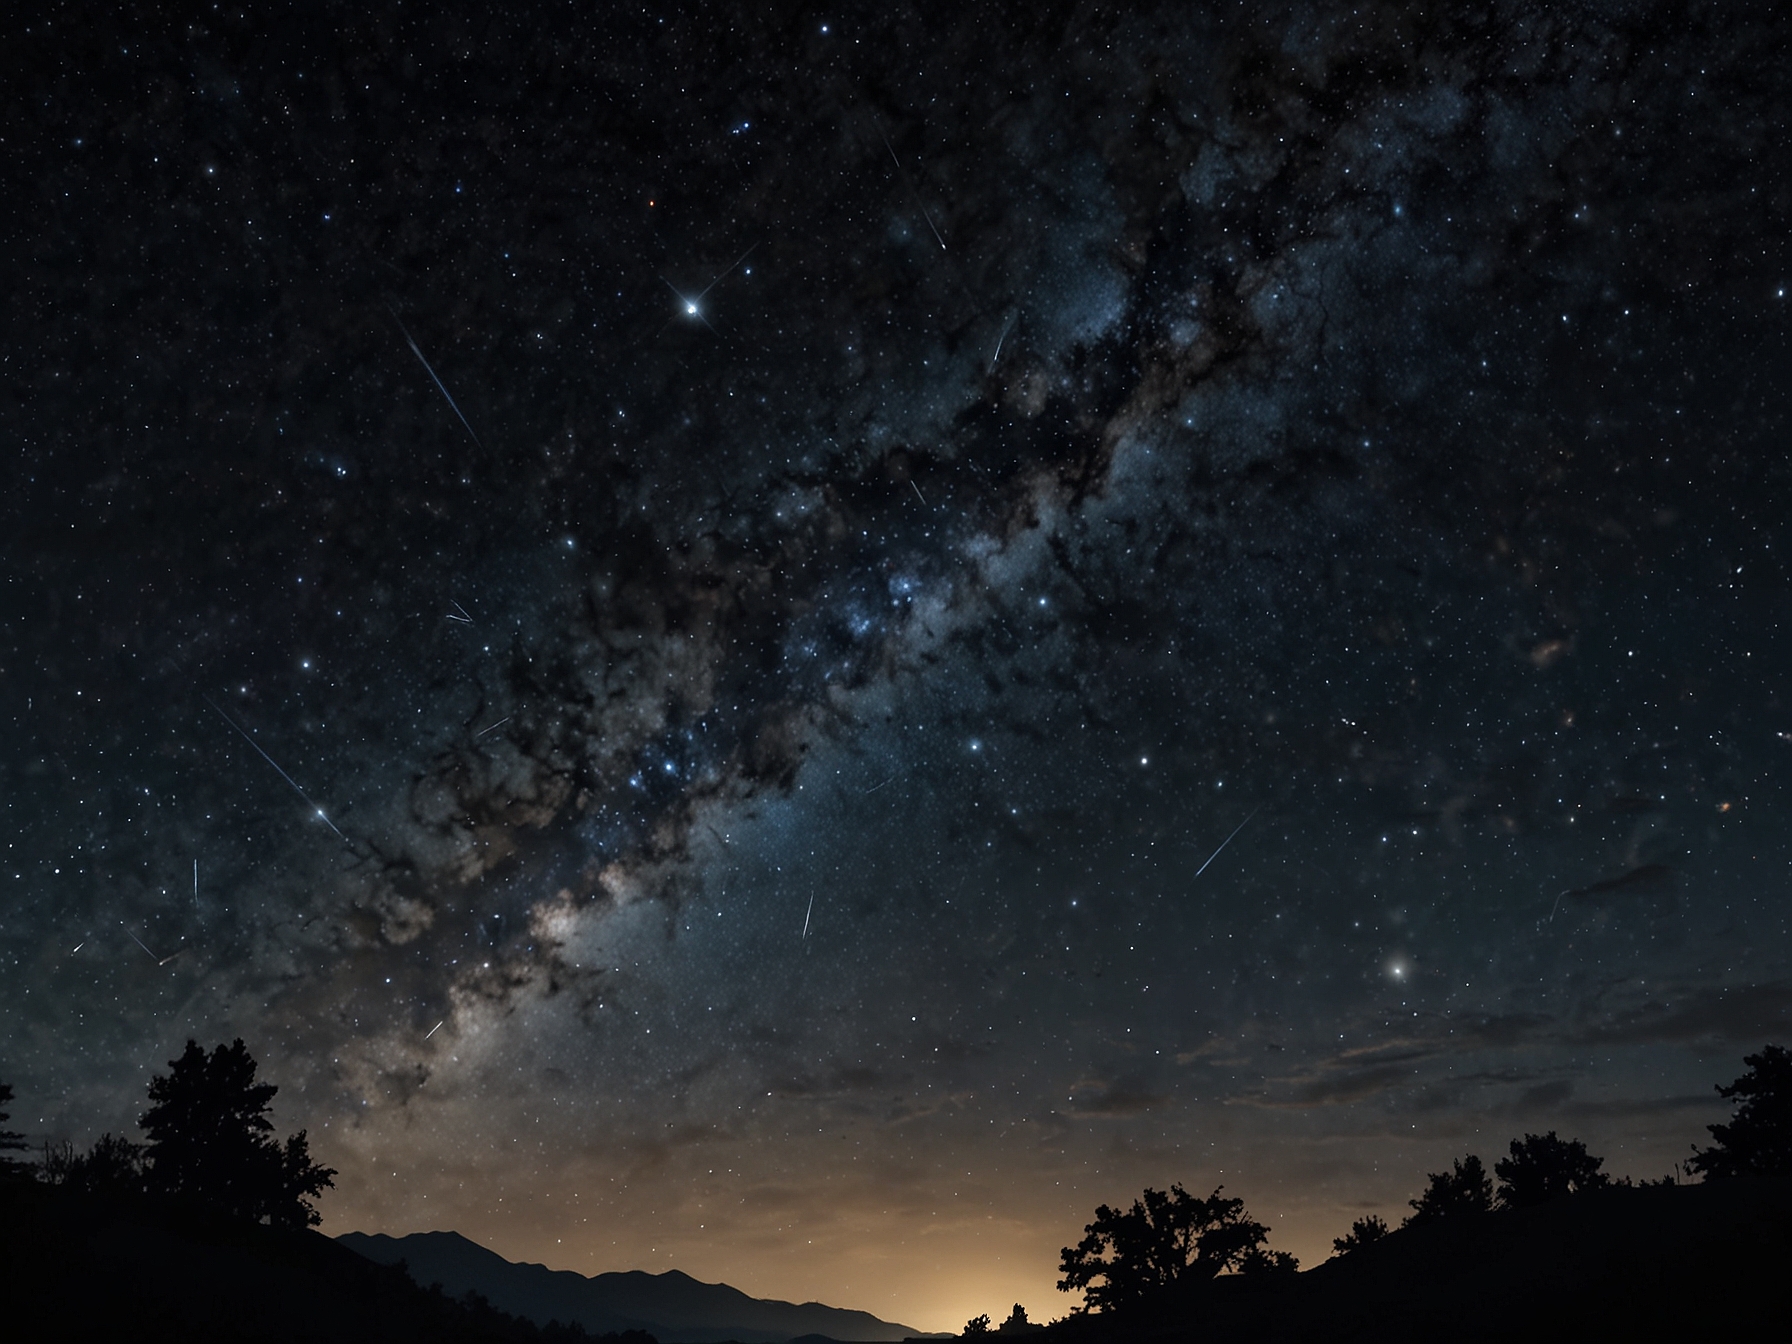 A scenic shot of the night sky featuring the Summer Triangle stars and the Milky Way galaxy, visible in a dark, clear sky free from city lights.